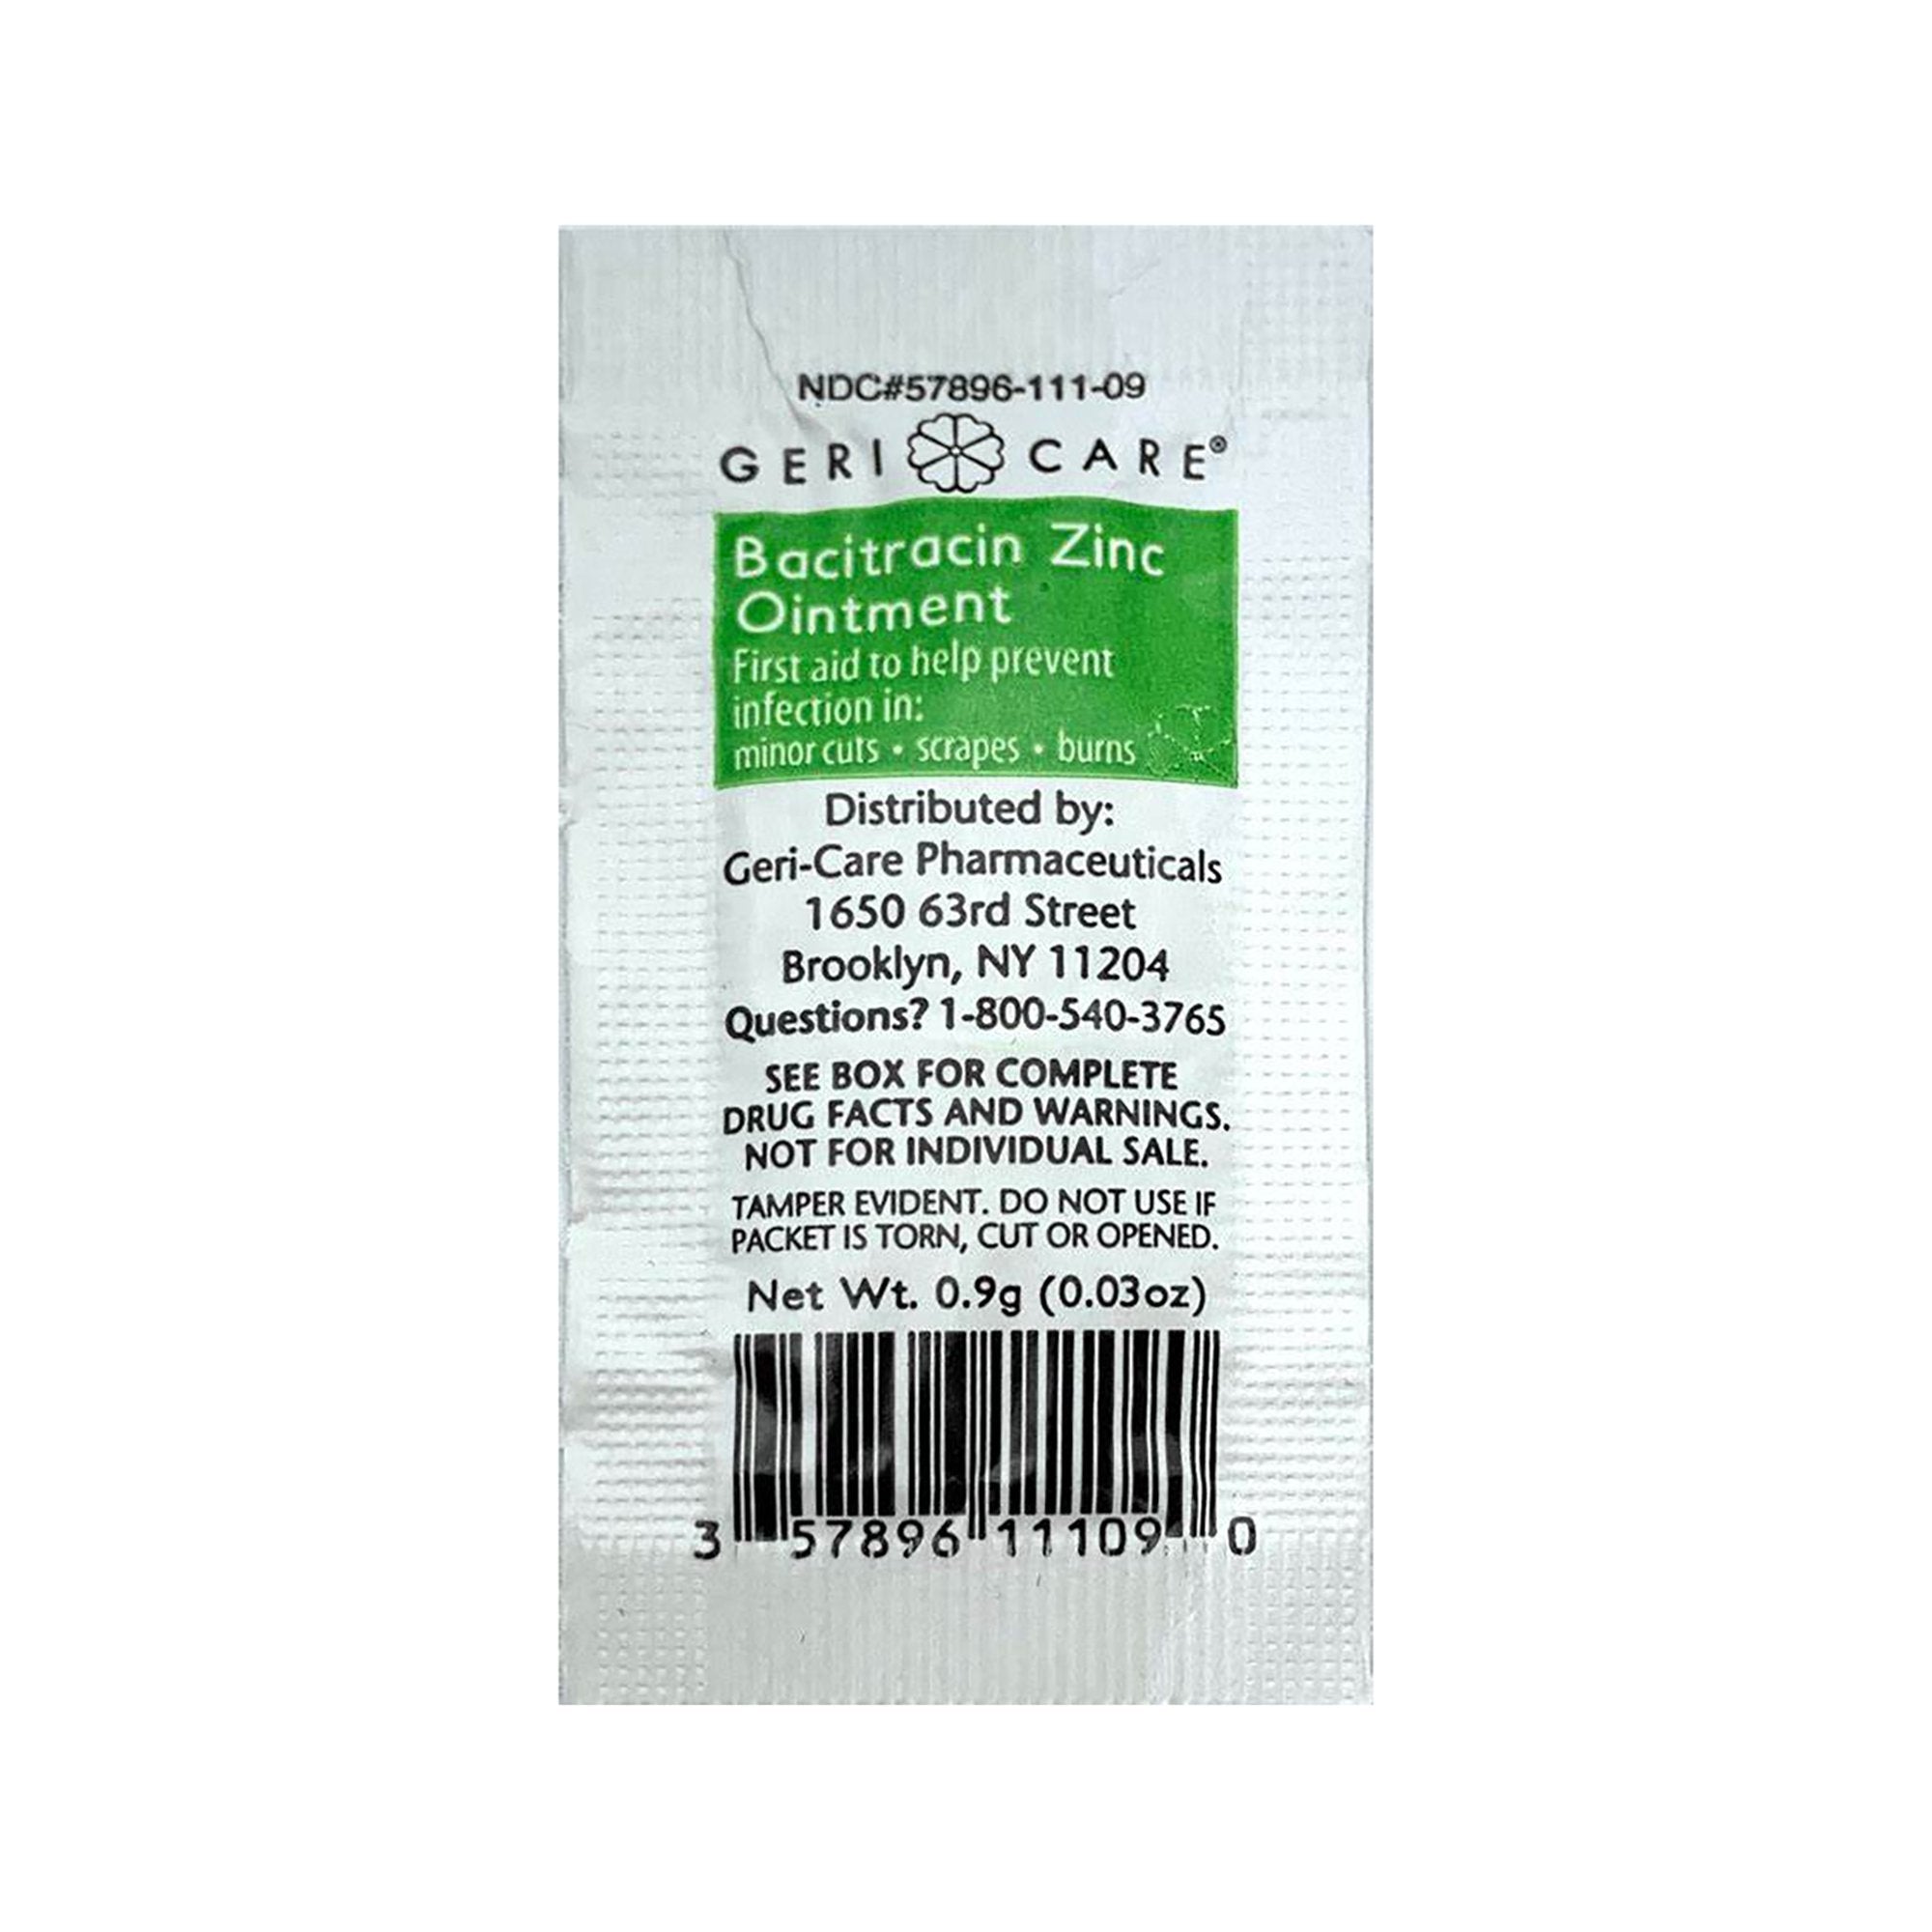 First Aid Antibiotic Ointment 0.9 Gram Individual Packet